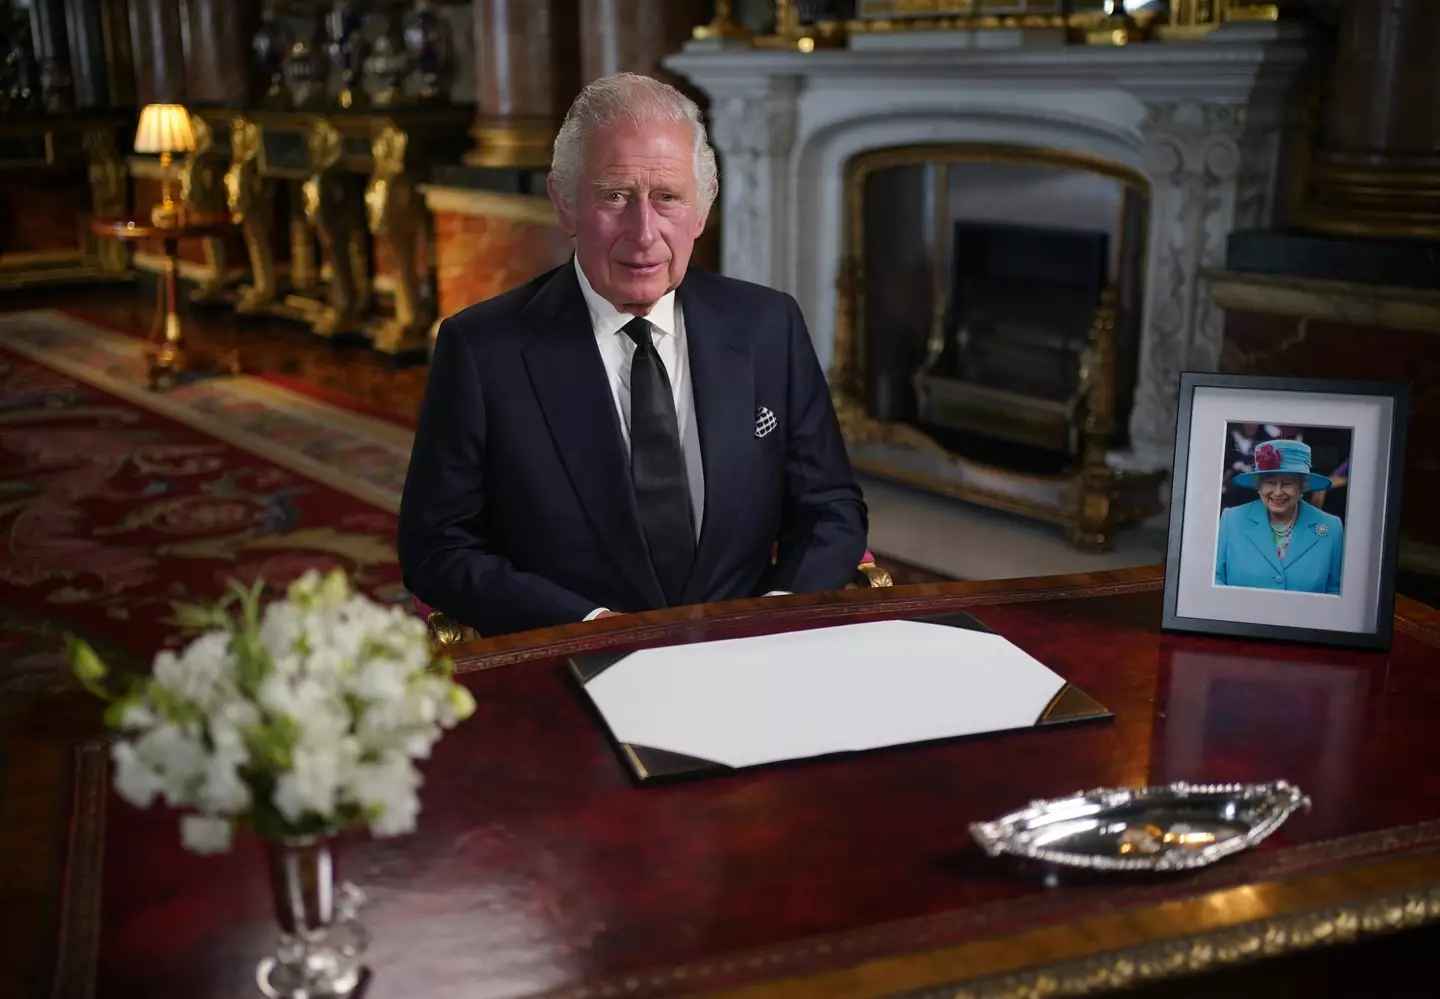 King Charles III thanked his mother for her incredible service.